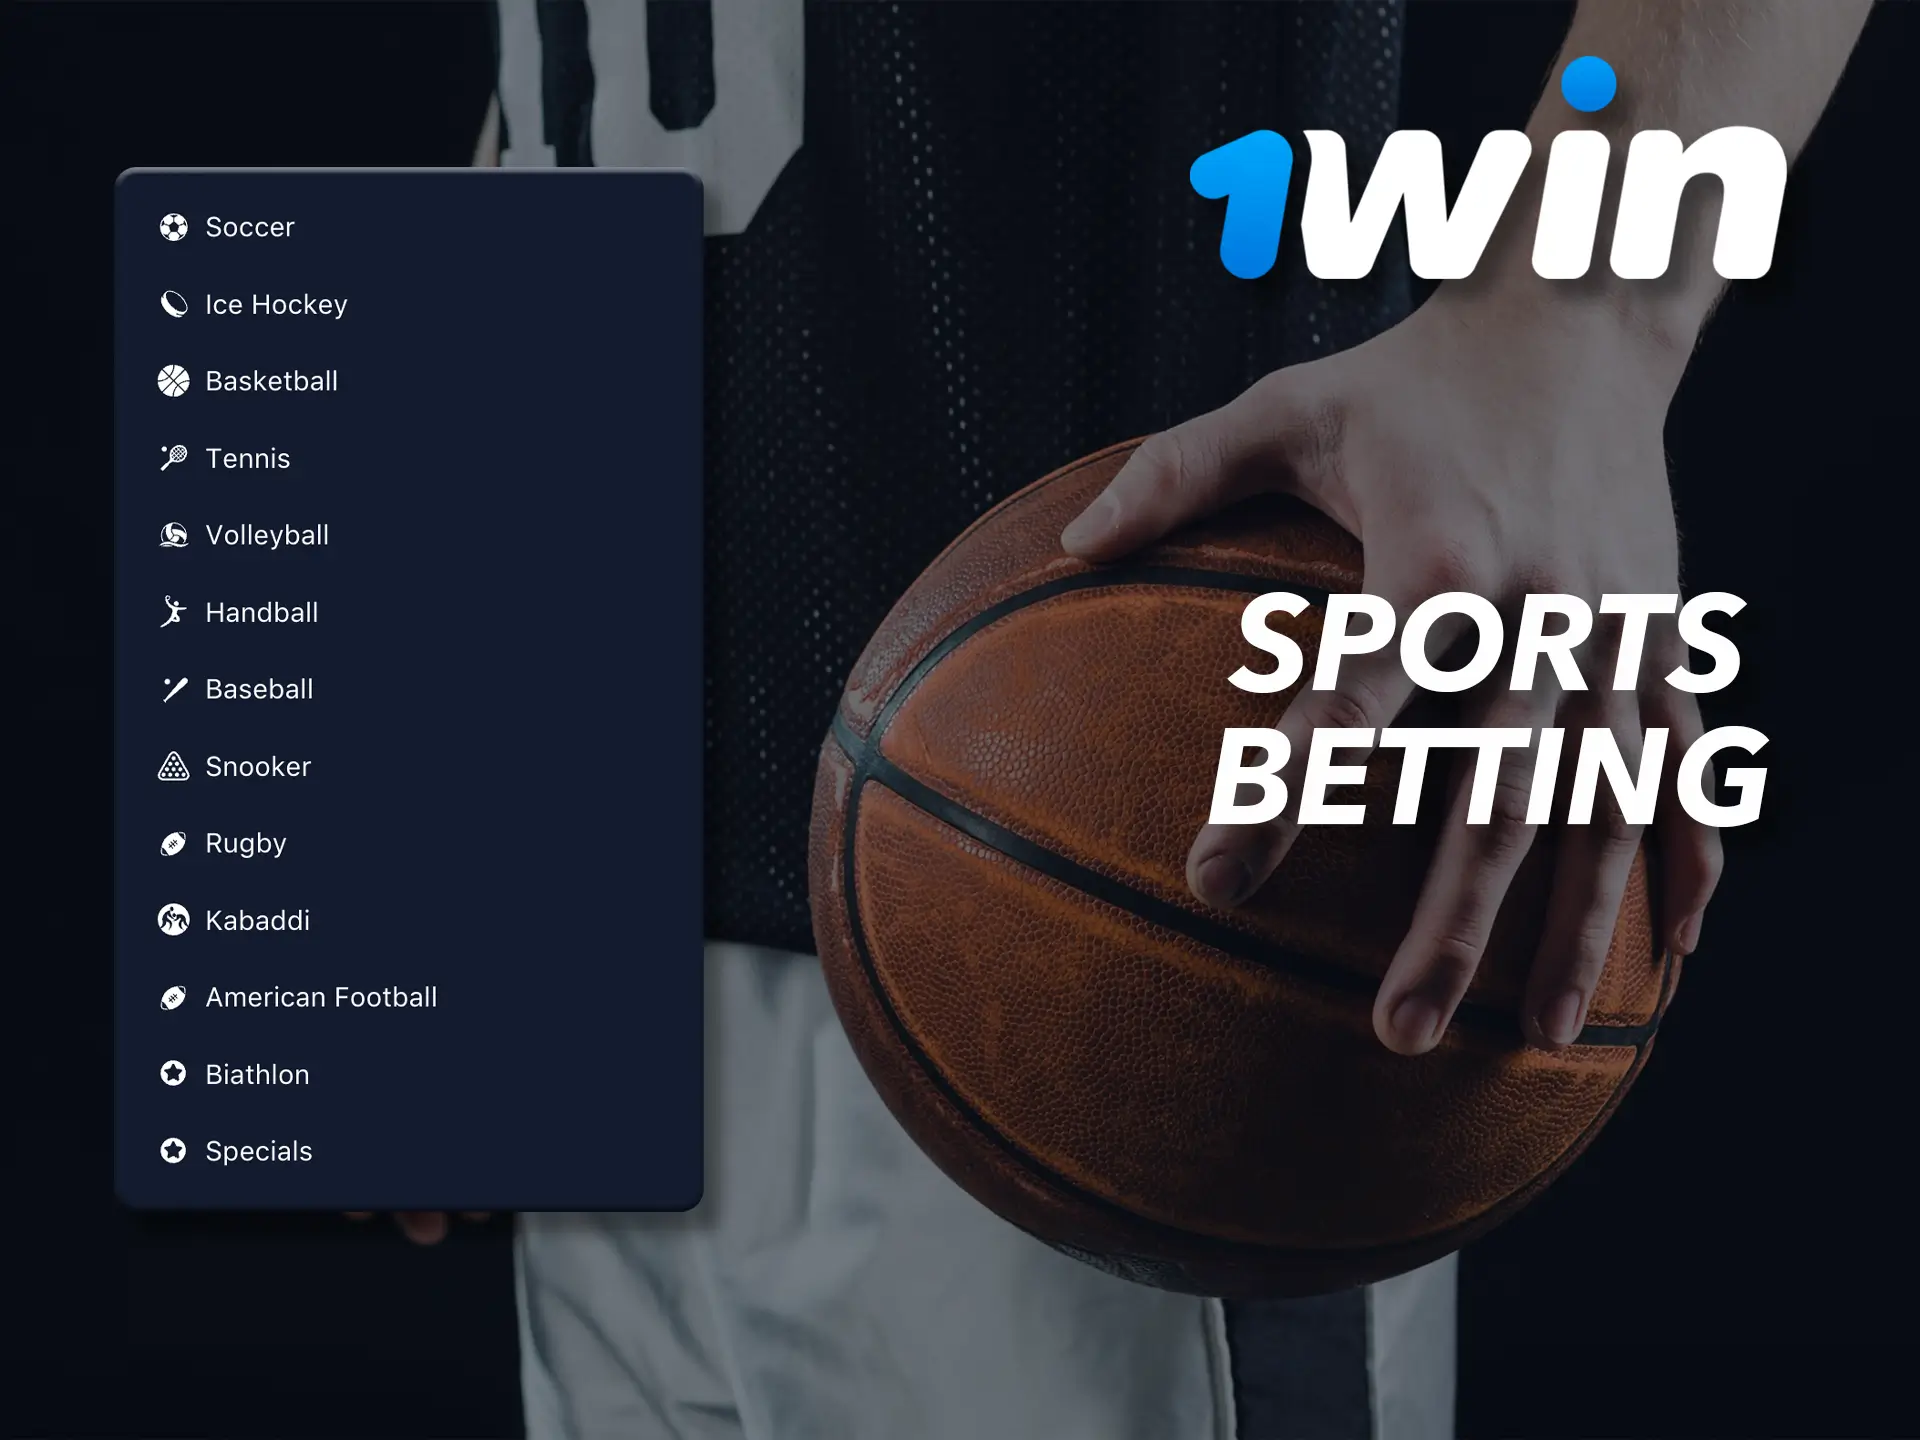 1Win offers customers a wide range of sports disciplines.